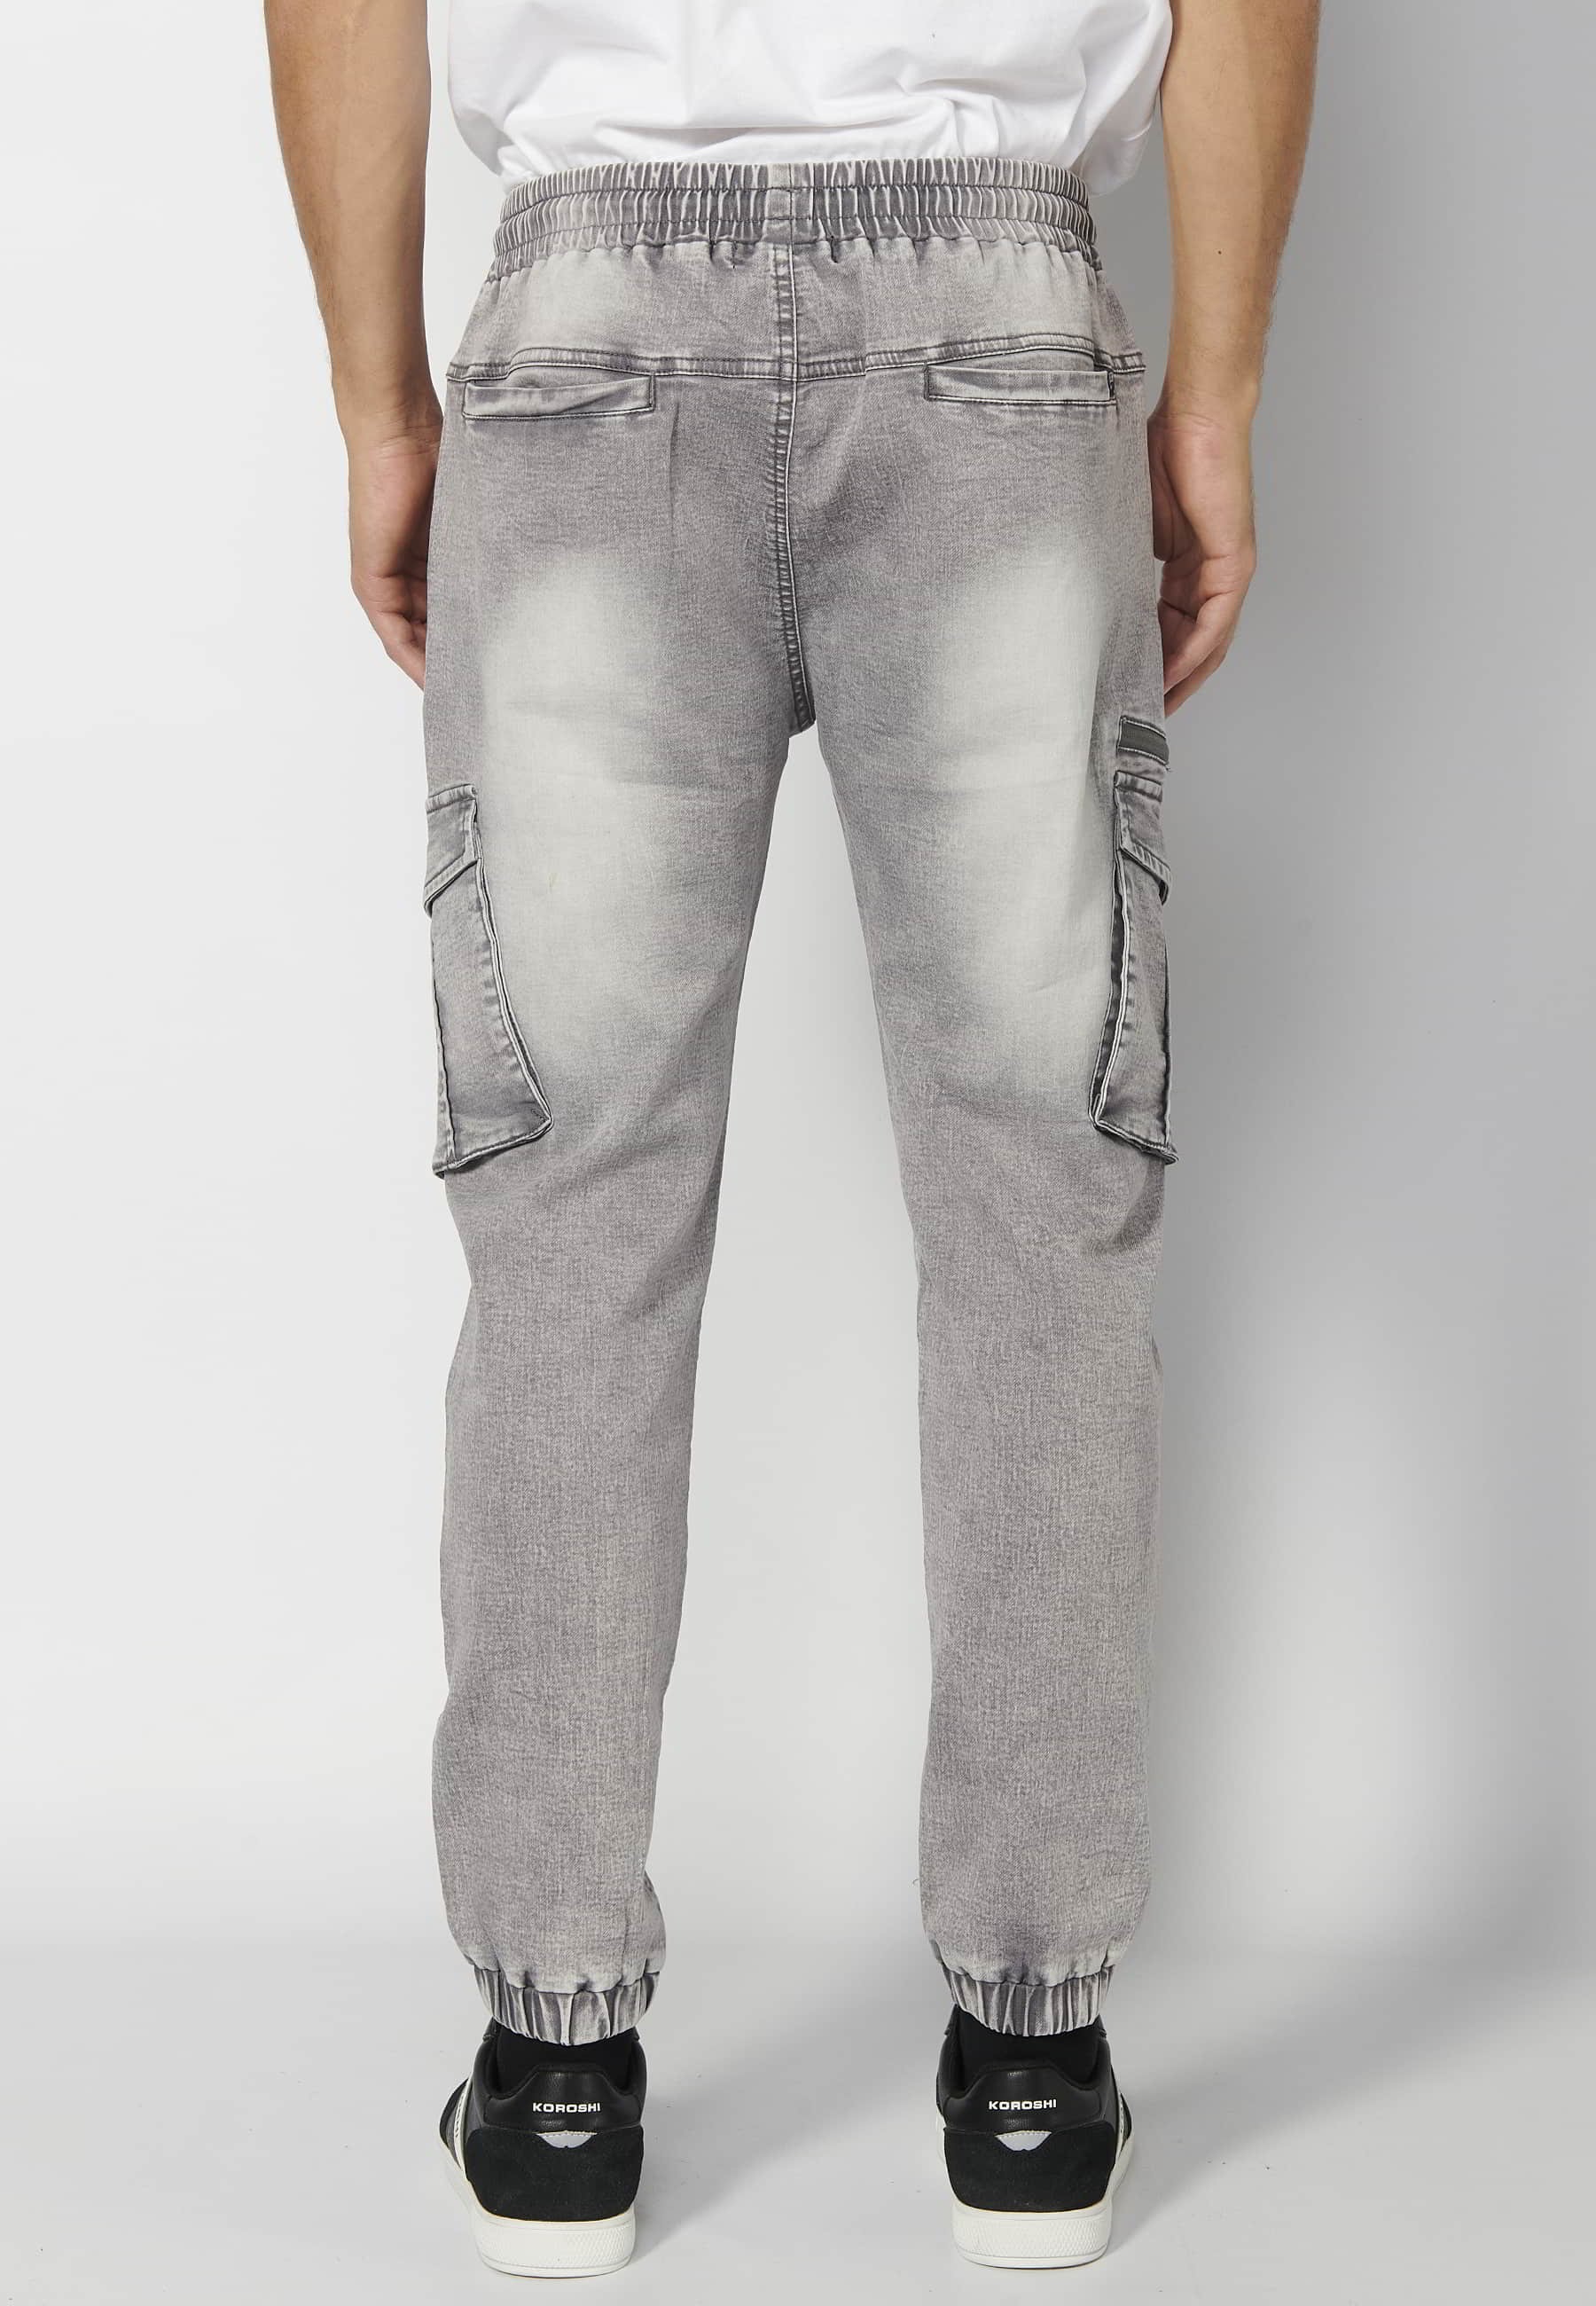 Long jogger pants with rubber finish with four pockets in Gray for Men 5